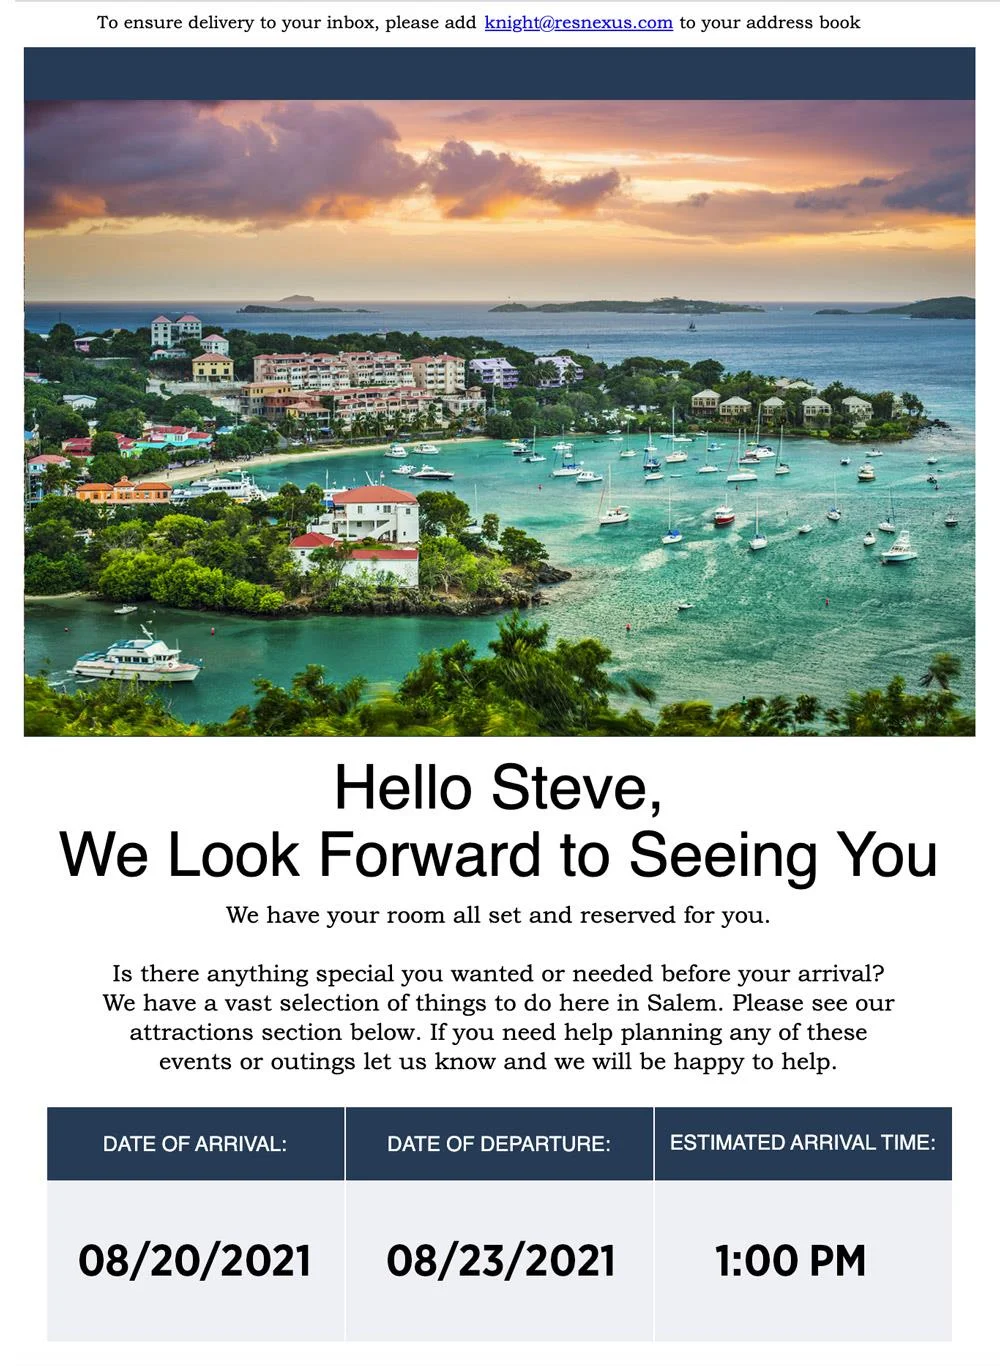 sample picture of welcome email